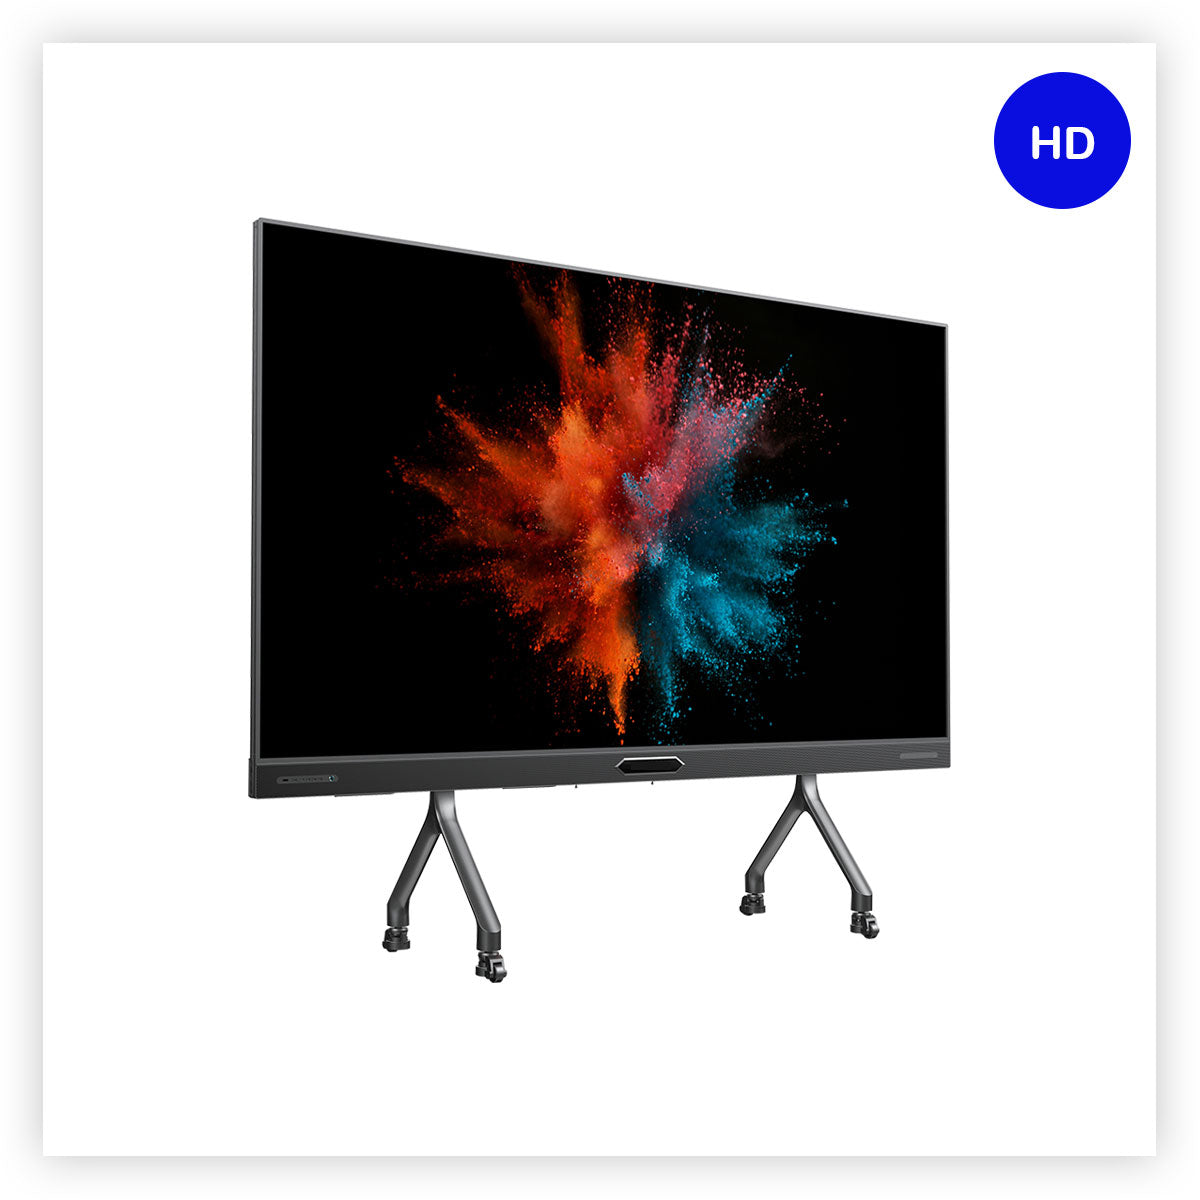 OmniTouch All-in-One HD System 165" P1.9mm